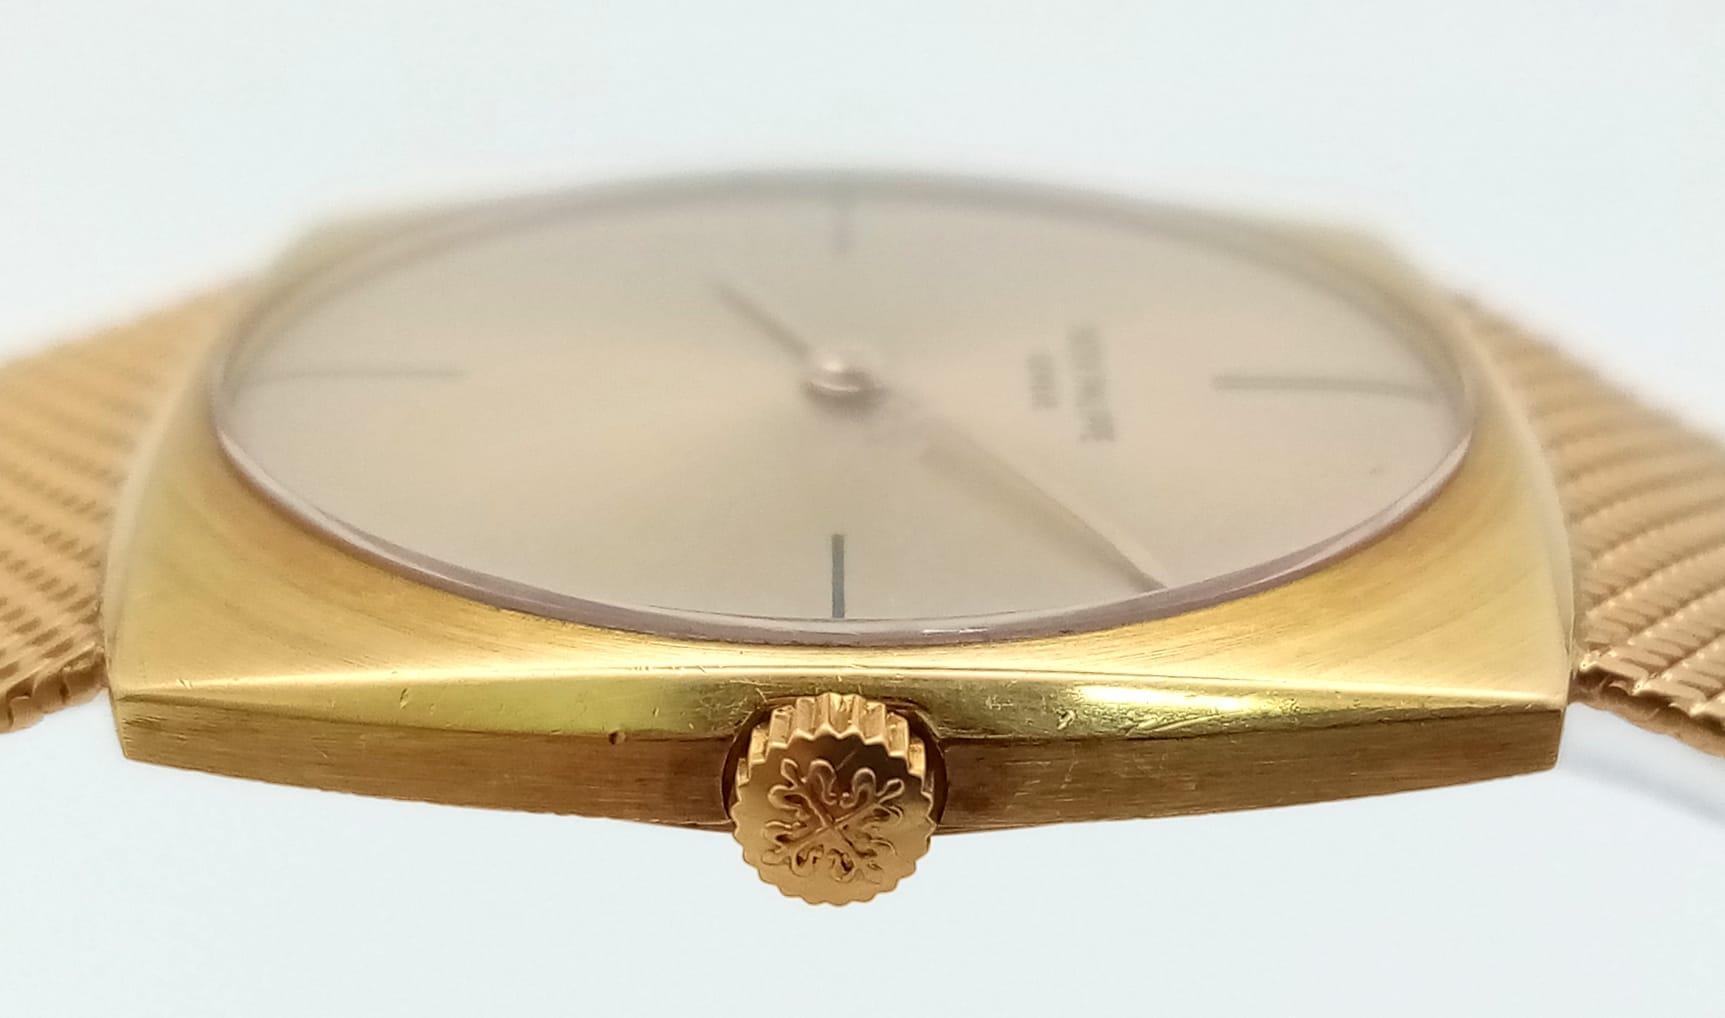 A Classic Vintage Patek Philippe 18K Gold Ladies Watch. 18k gold bracelet and square case - 28mm. - Image 5 of 6